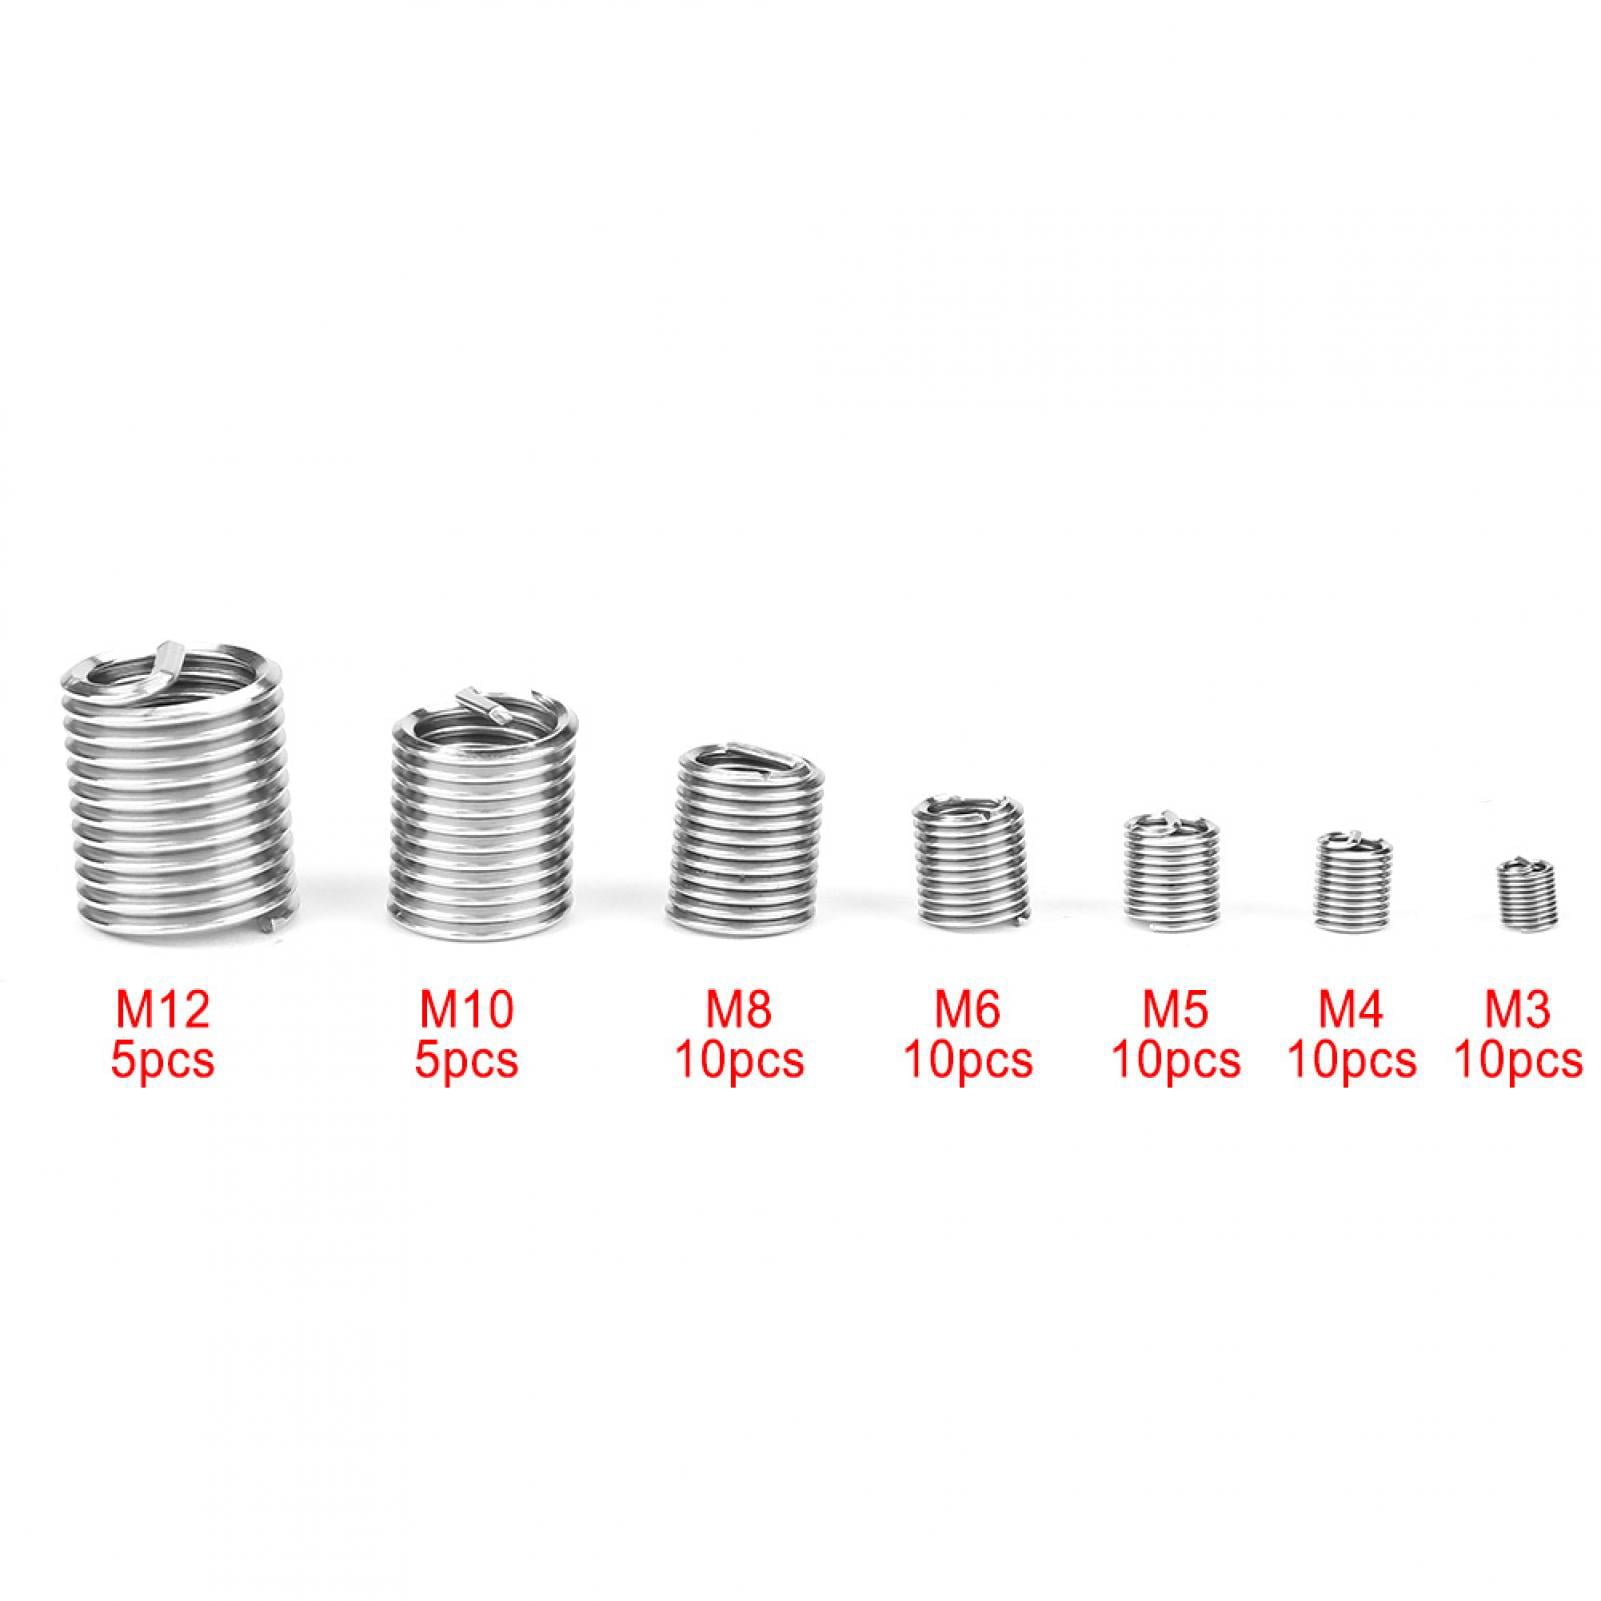 Threaded Inserts 60Pcs M3/4/5/6/8/10/12 Stainless Steel Coiled Wire Helical Screw Threaded Inserts Set for Aluminum,Magnesium 